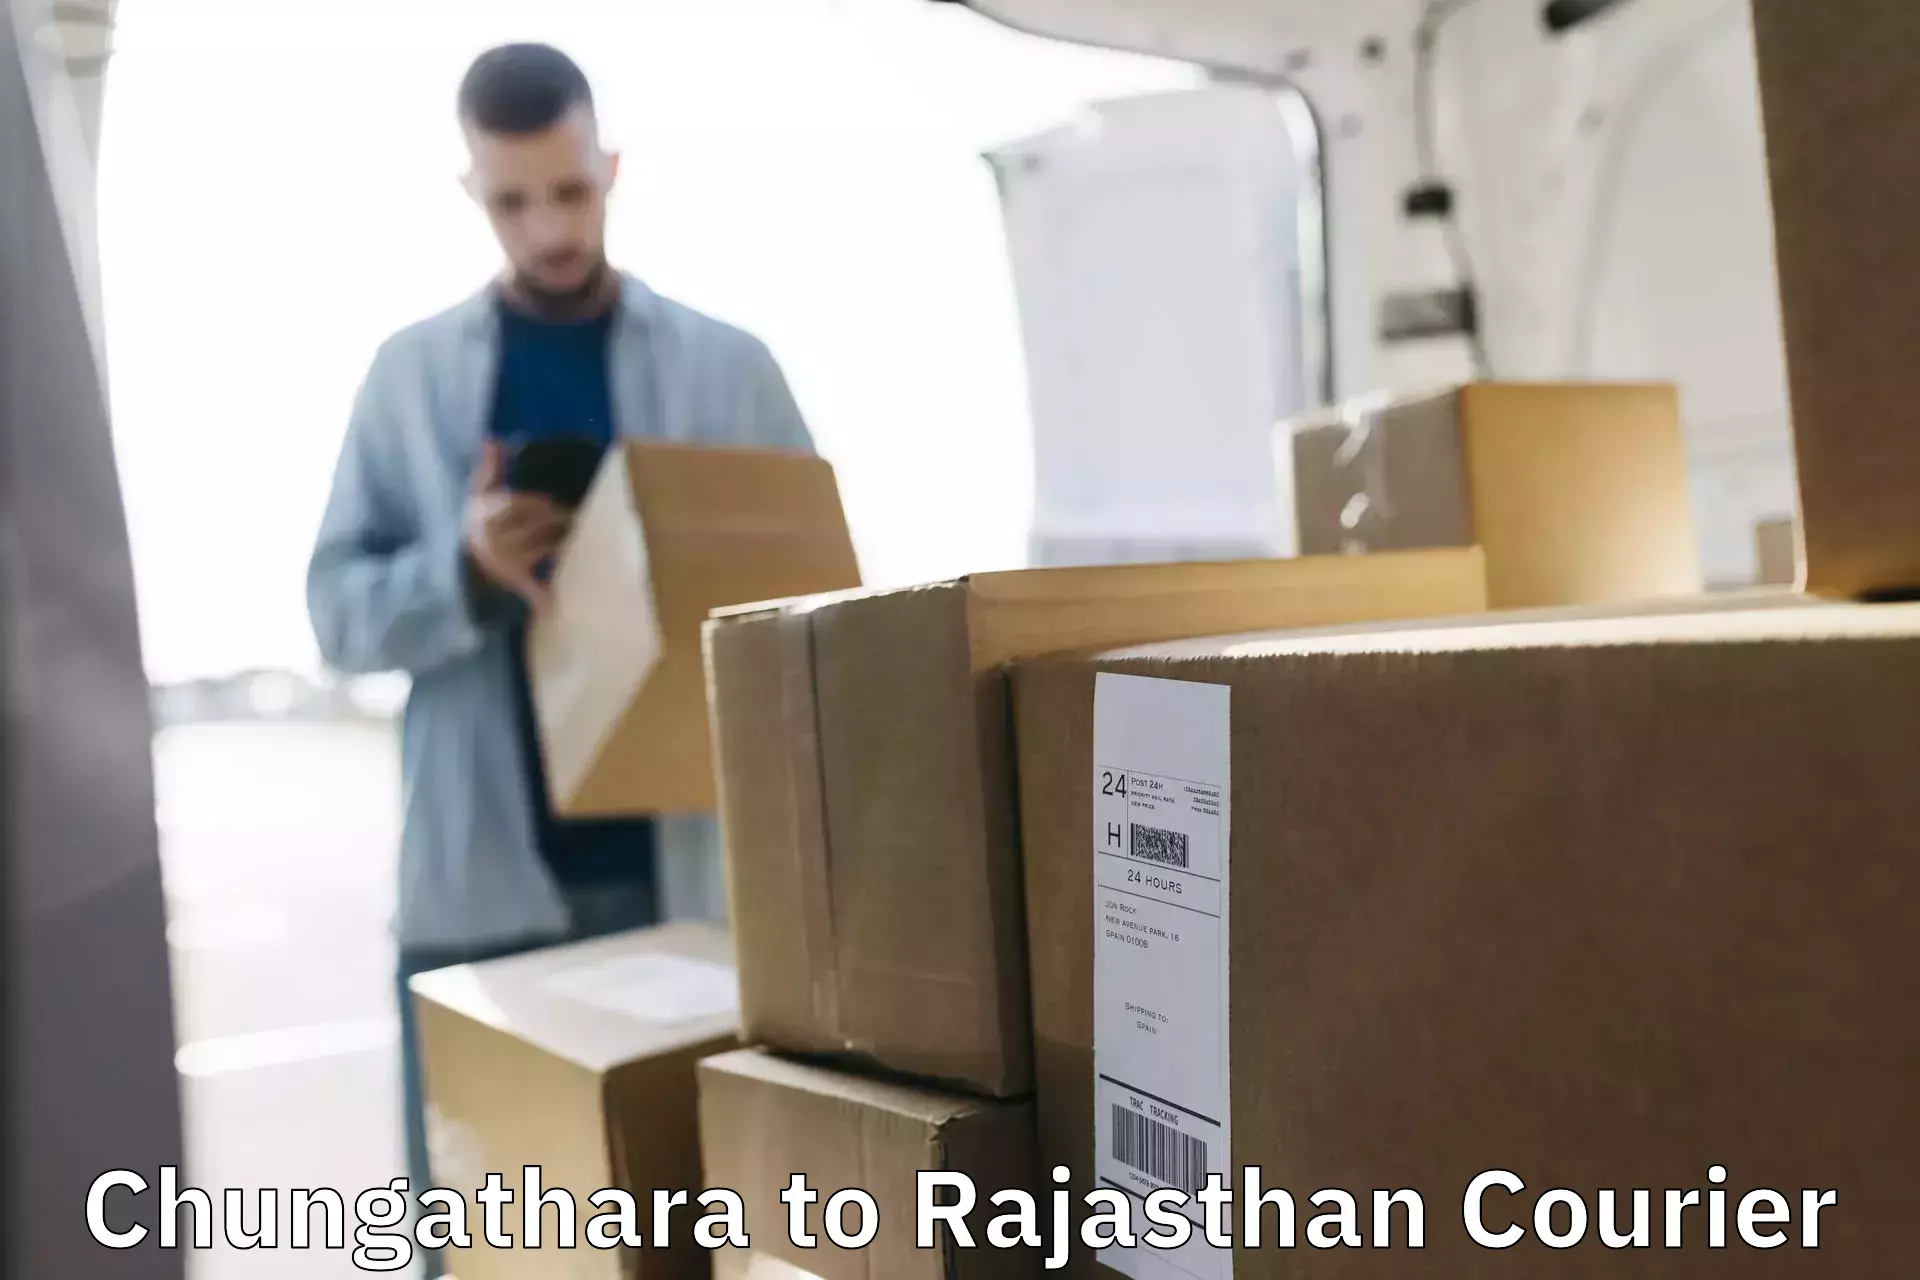 Courier app Chungathara to Rajasthan